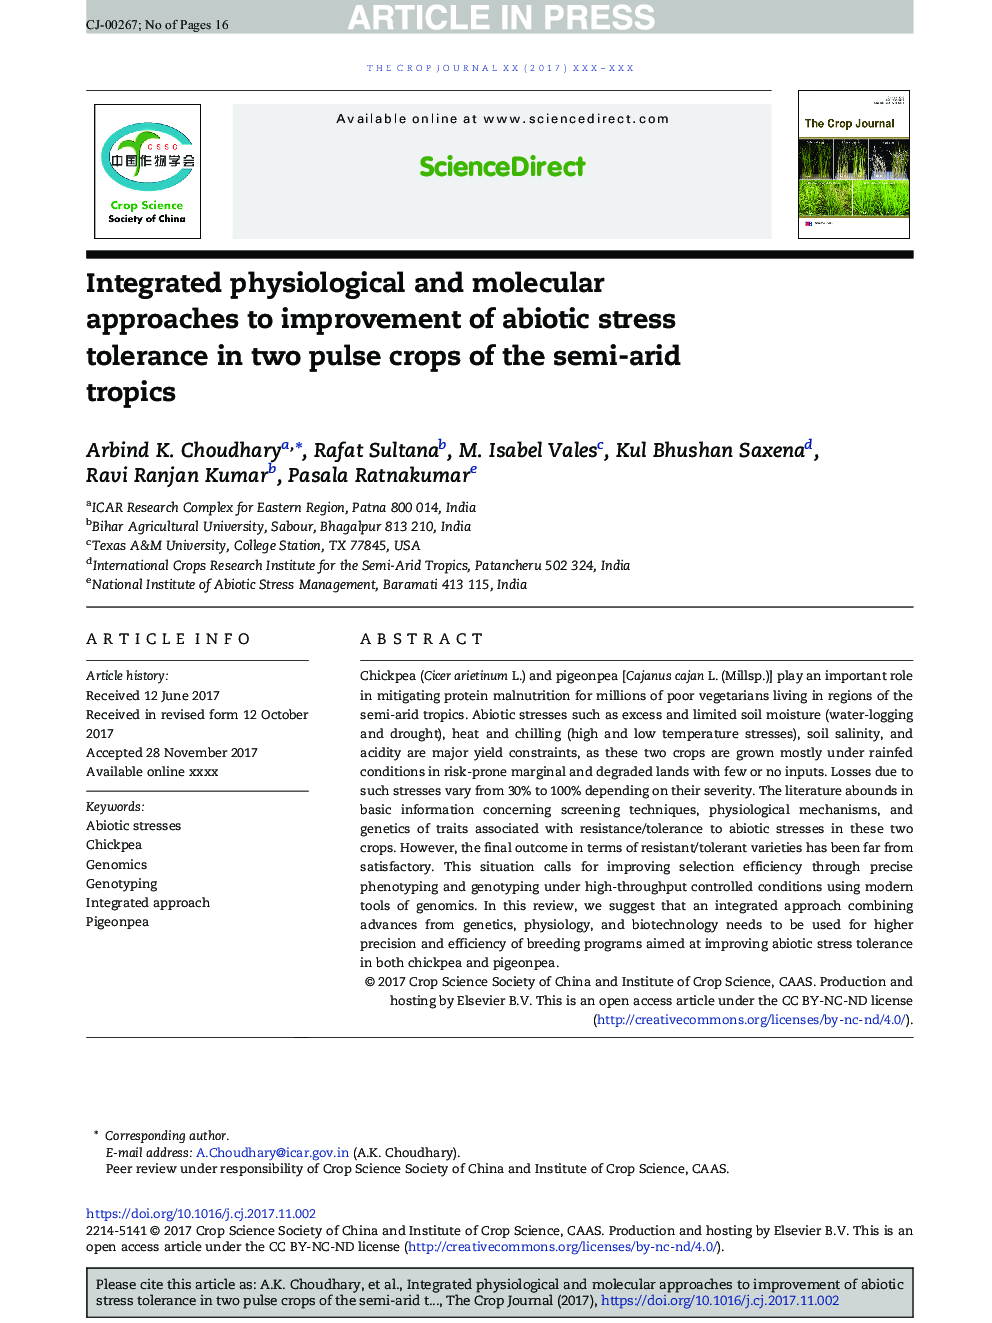 Integrated physiological and molecular approaches to improvement of abiotic stress tolerance in two pulse crops of the semi-arid tropics